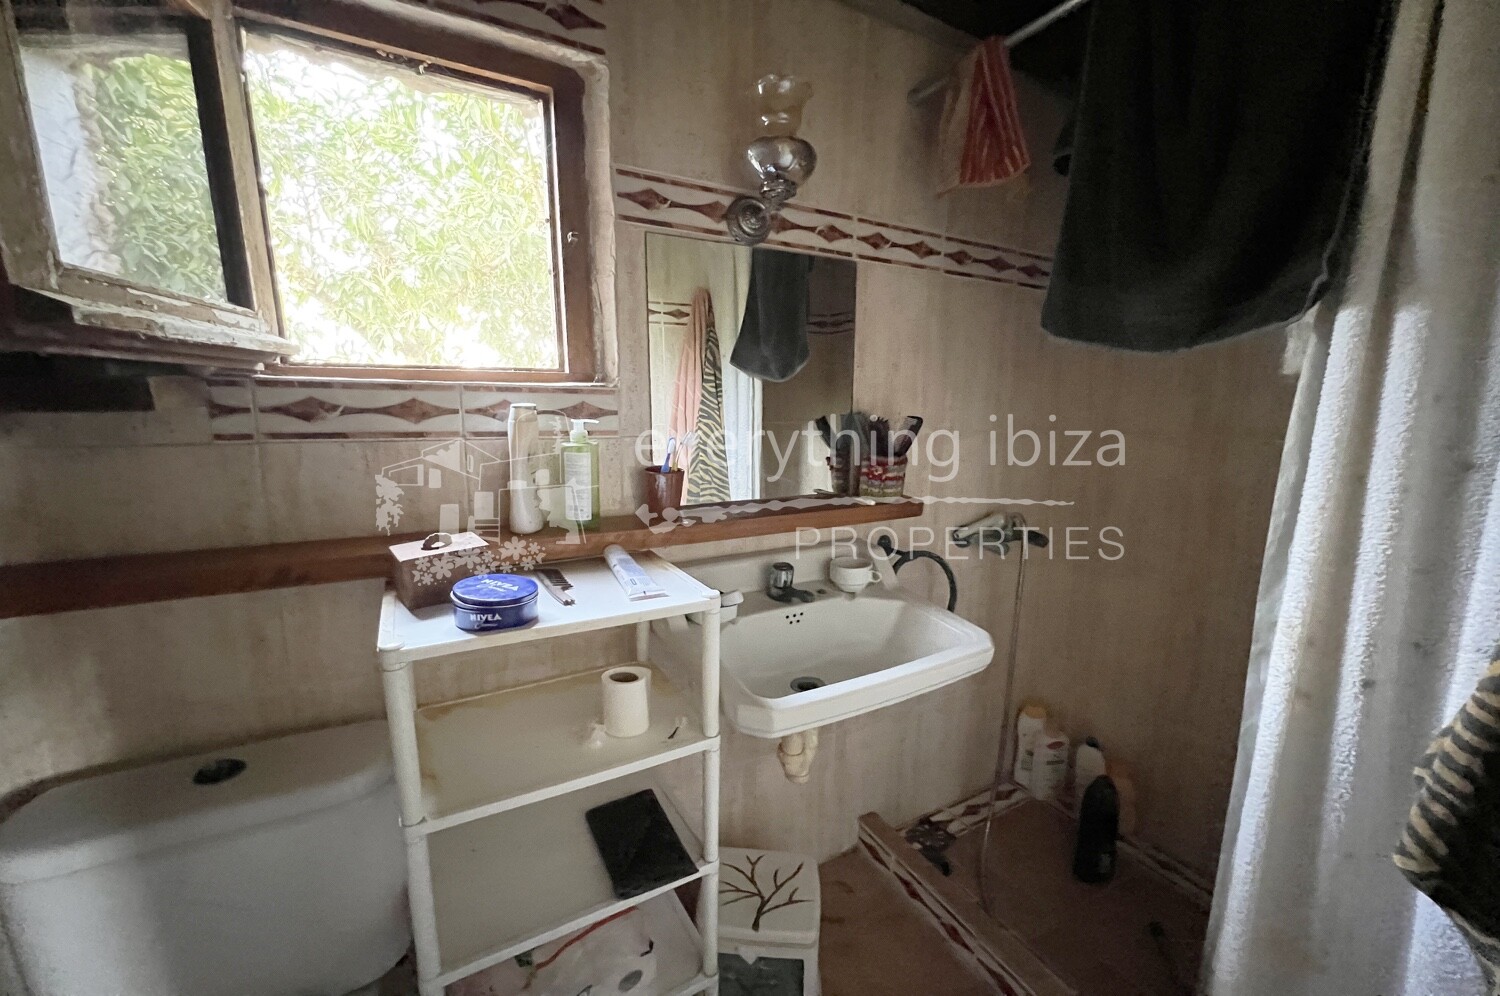 Rustic Ibiza Villa Close to the Beach & Ideal for Renovation, ref. 1511, for sale in Ibiza by everything ibiza Properties